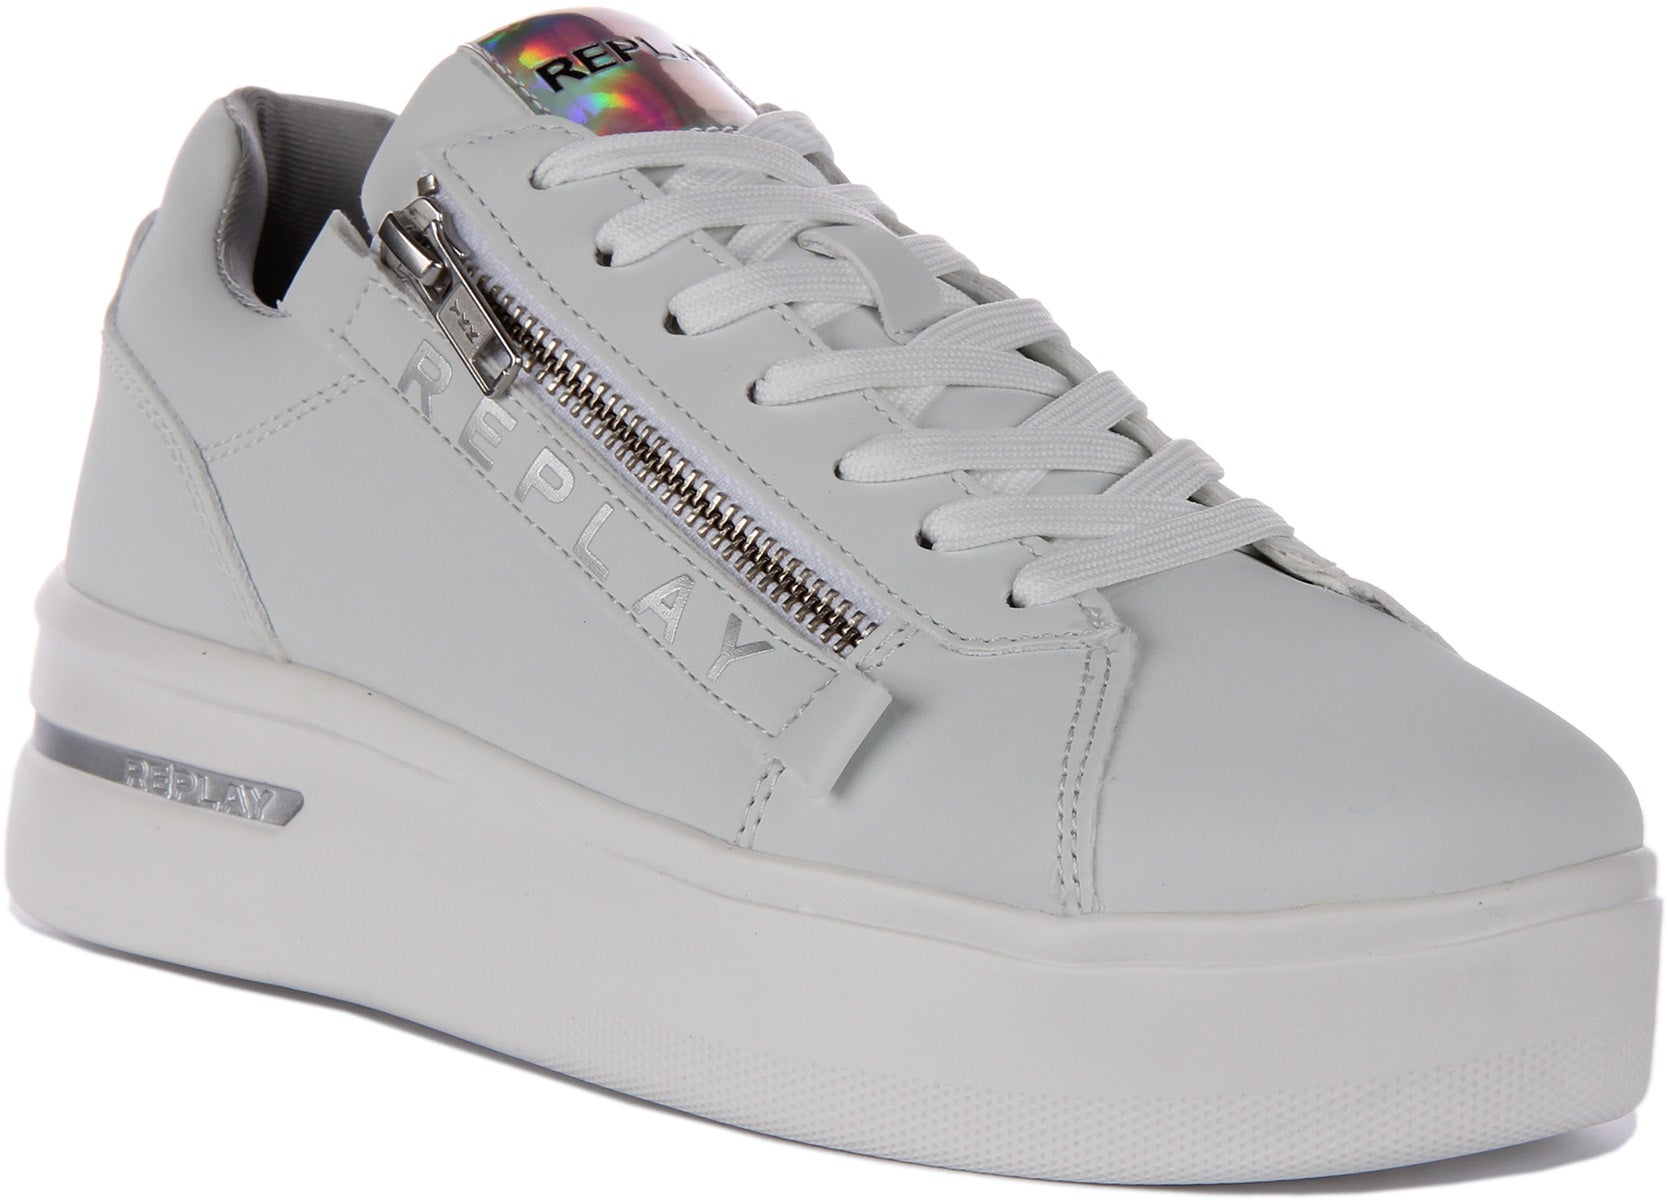 Replay Wilhot In White Trainers Zipped Design Lace Up Cupsole Size UK 6 - 12